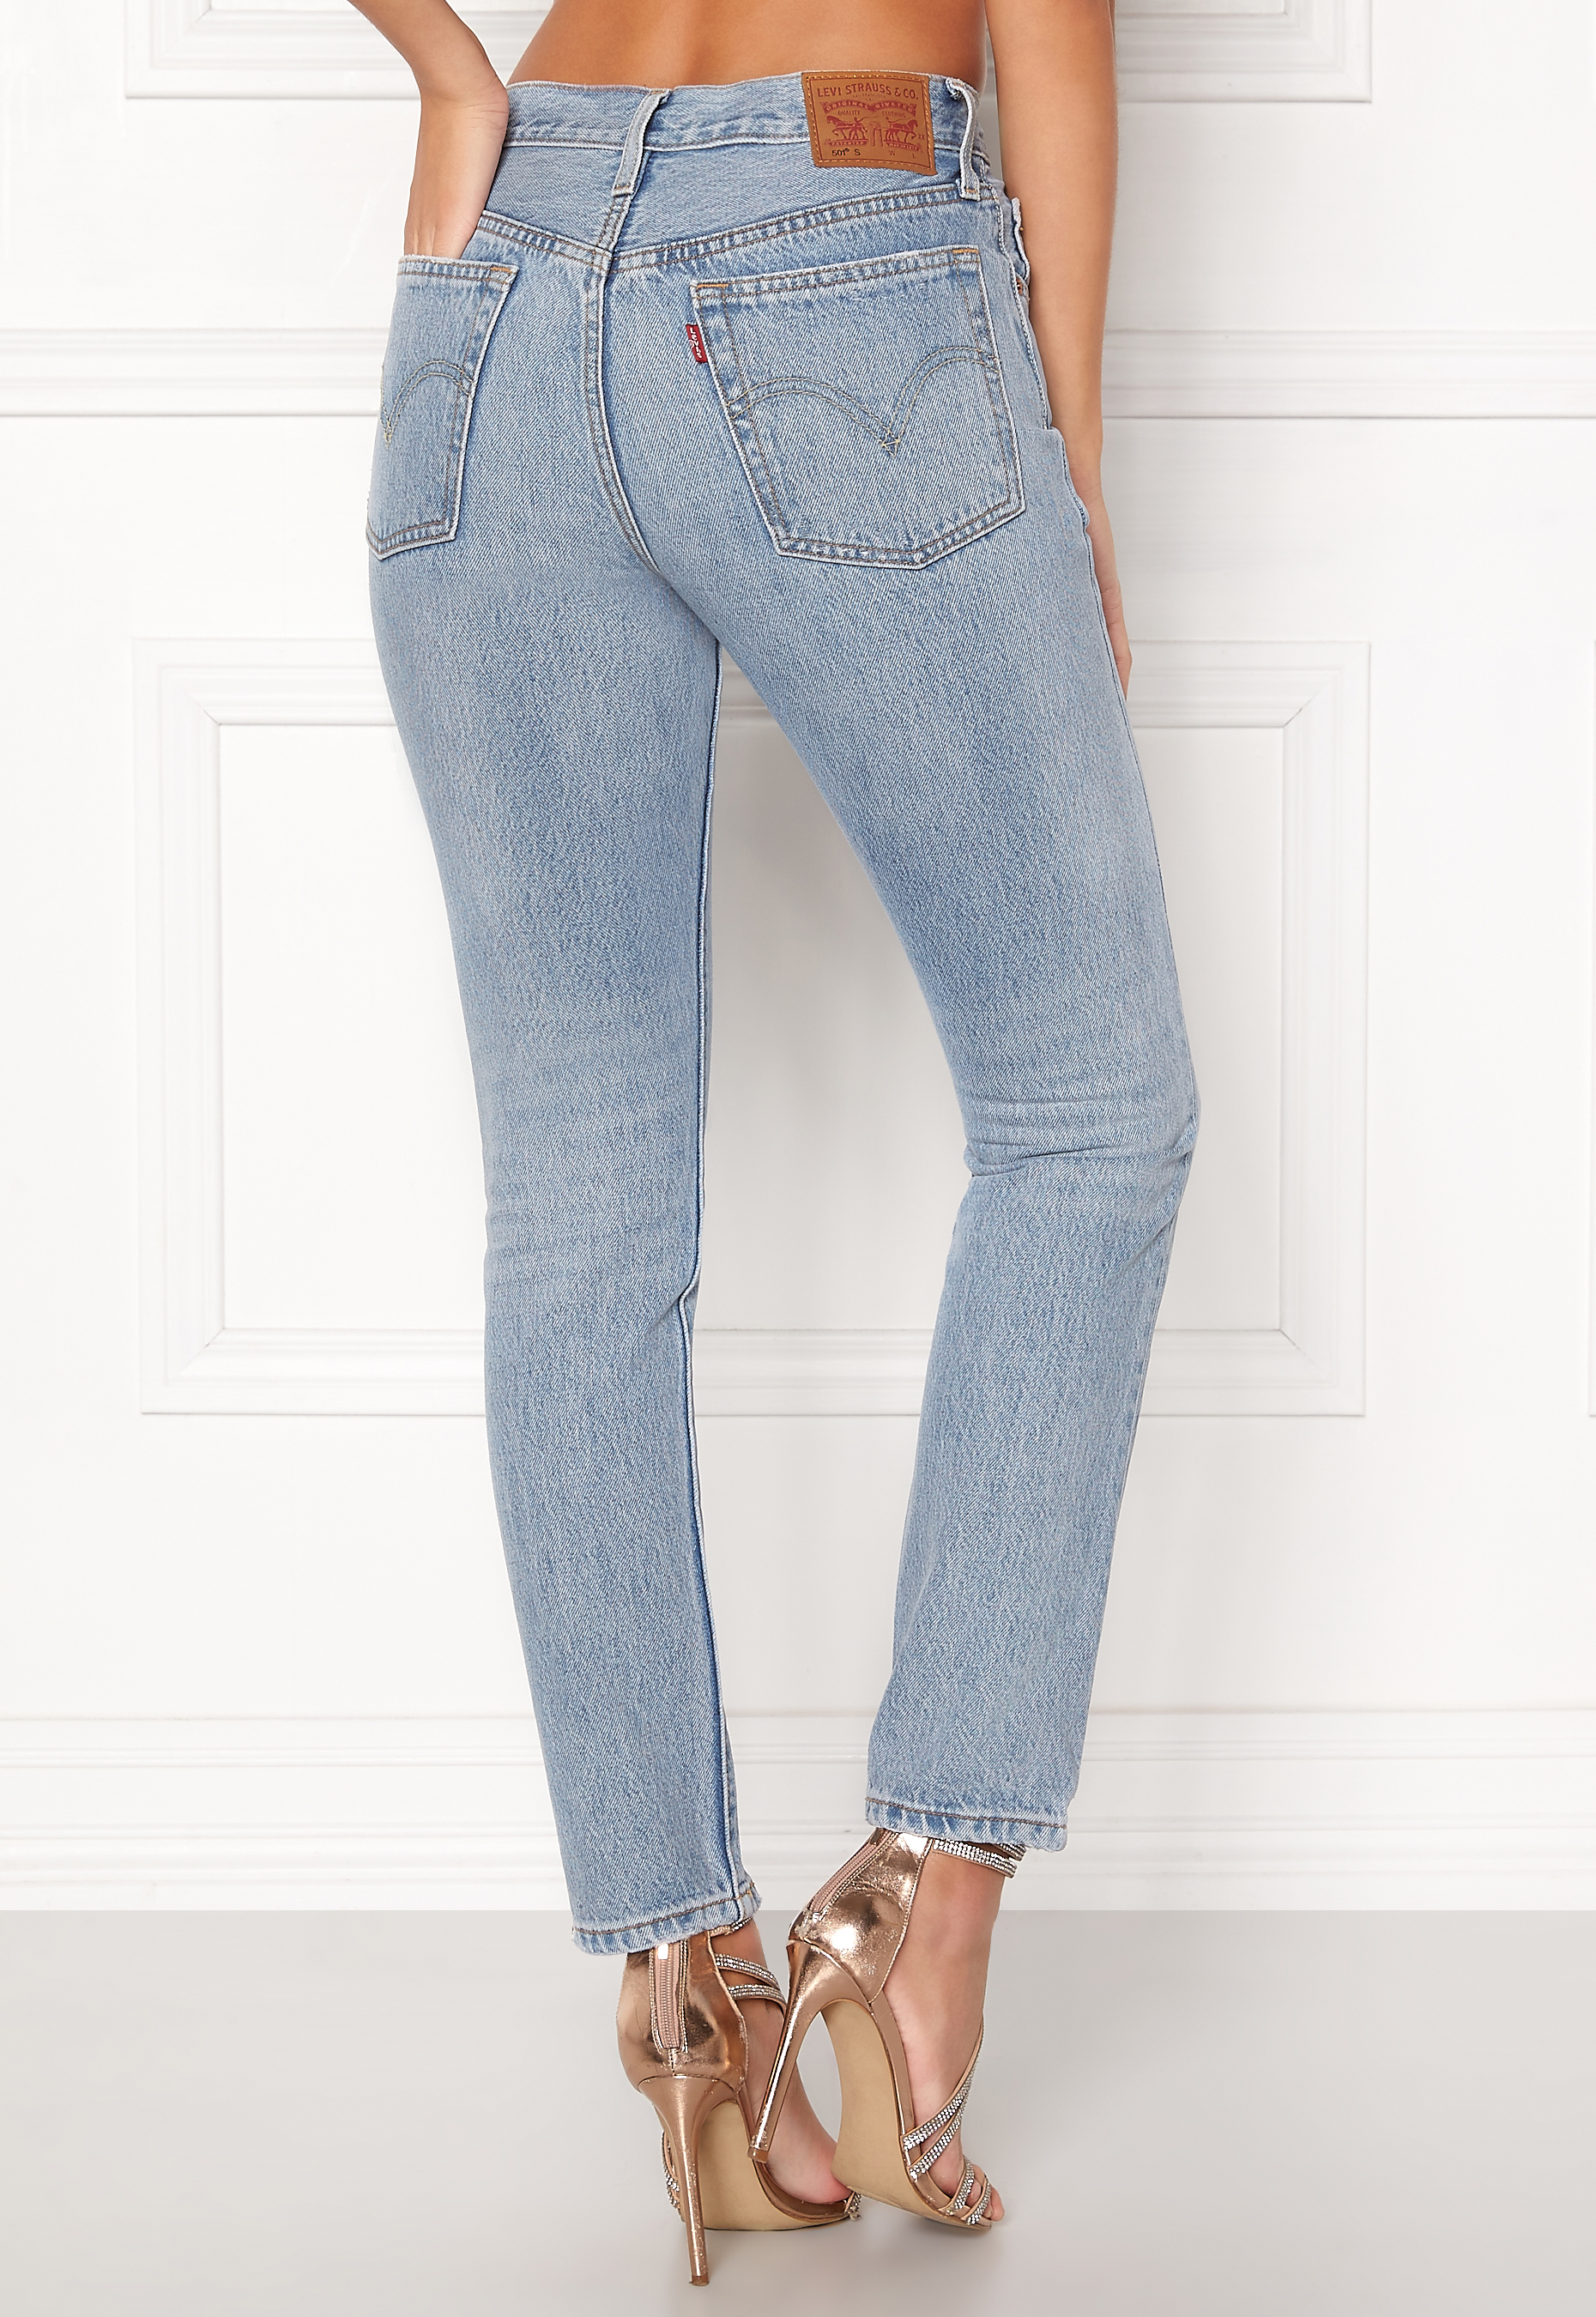 LEVI'S 501 Skinny In Can't Touch This REVOLVE 